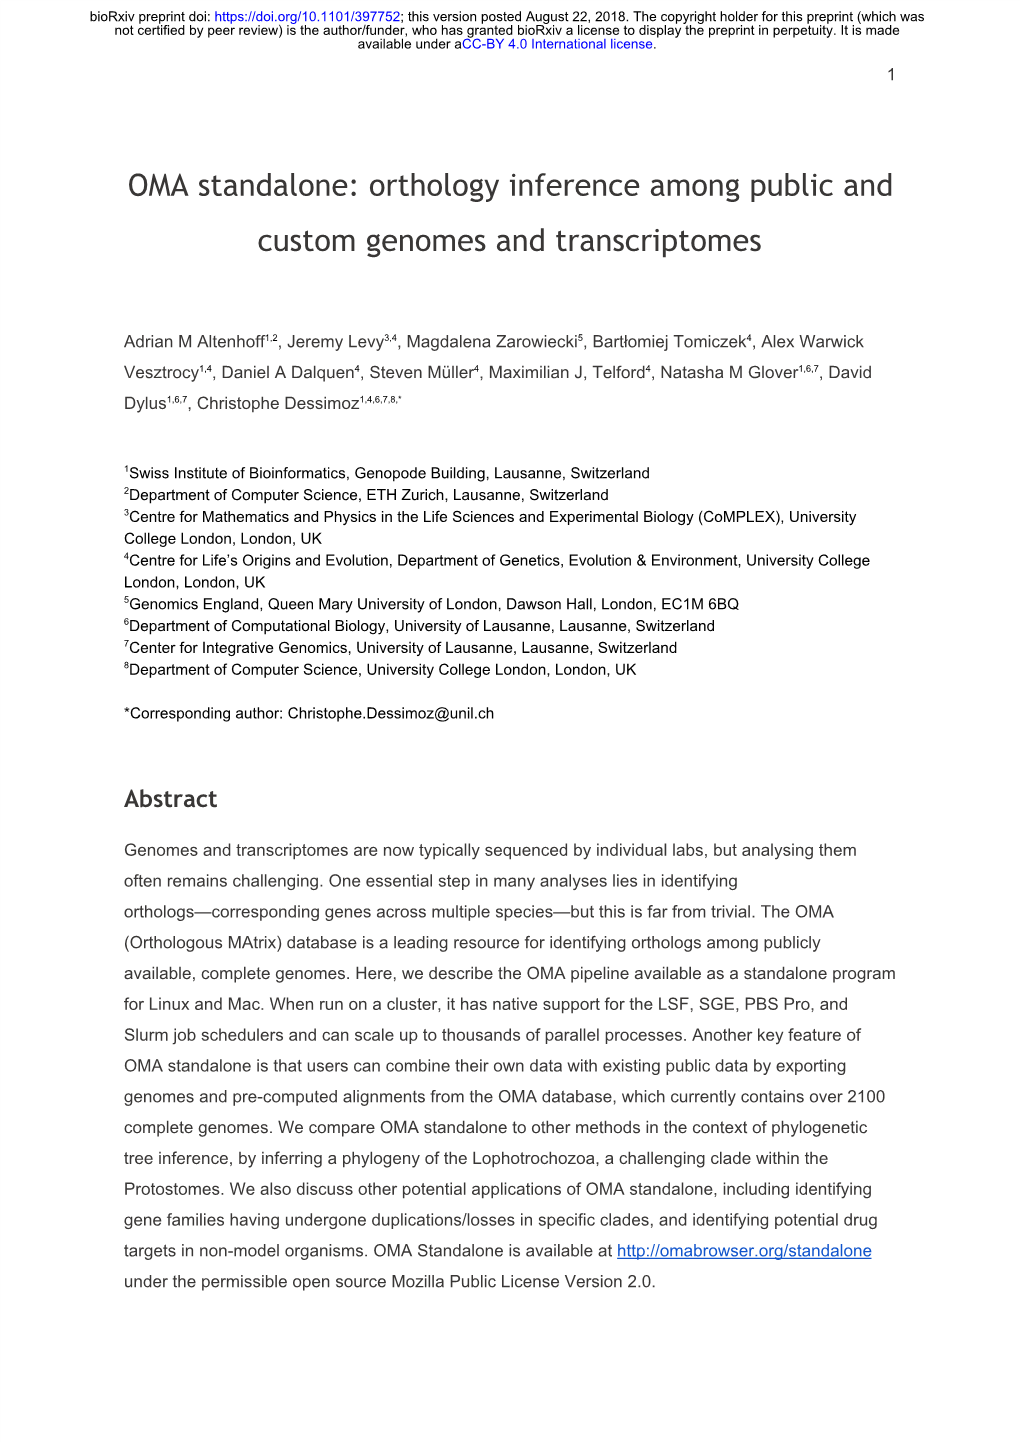 OMA Standalone: Orthology Inference Among Public and Custom Genomes and Transcriptomes